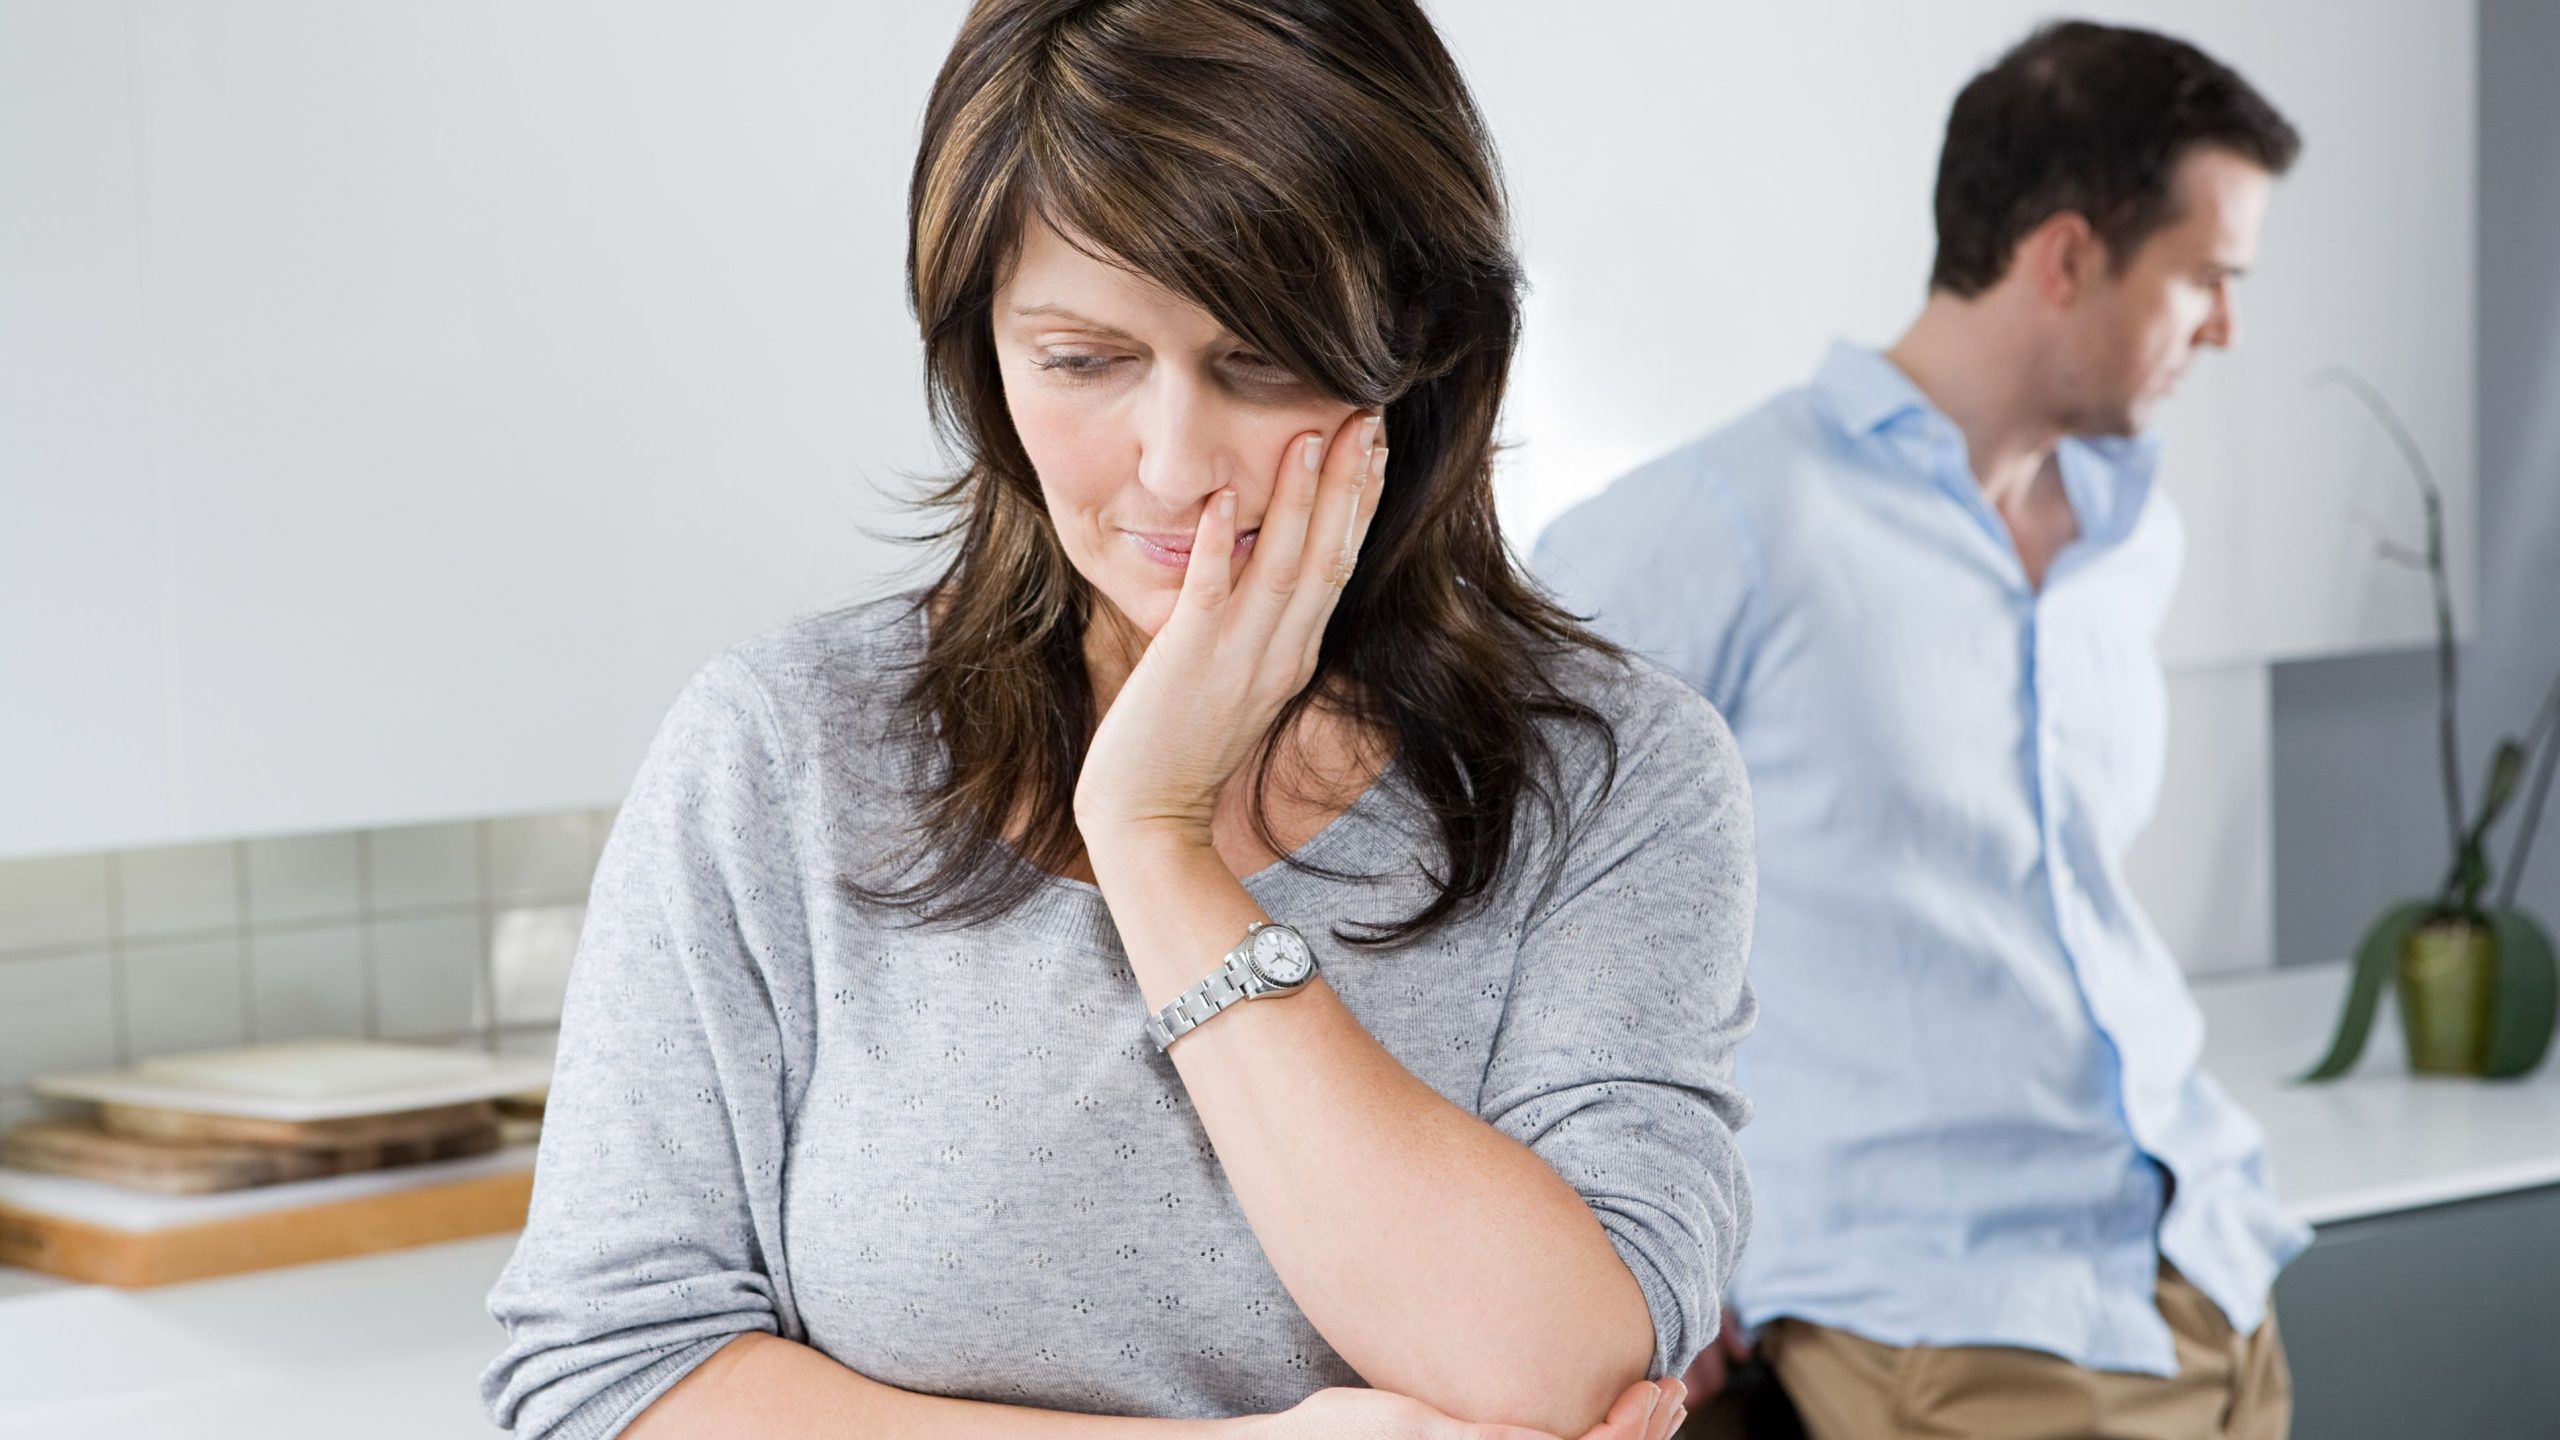 What Are the Requirements for Getting a Divorce in California?